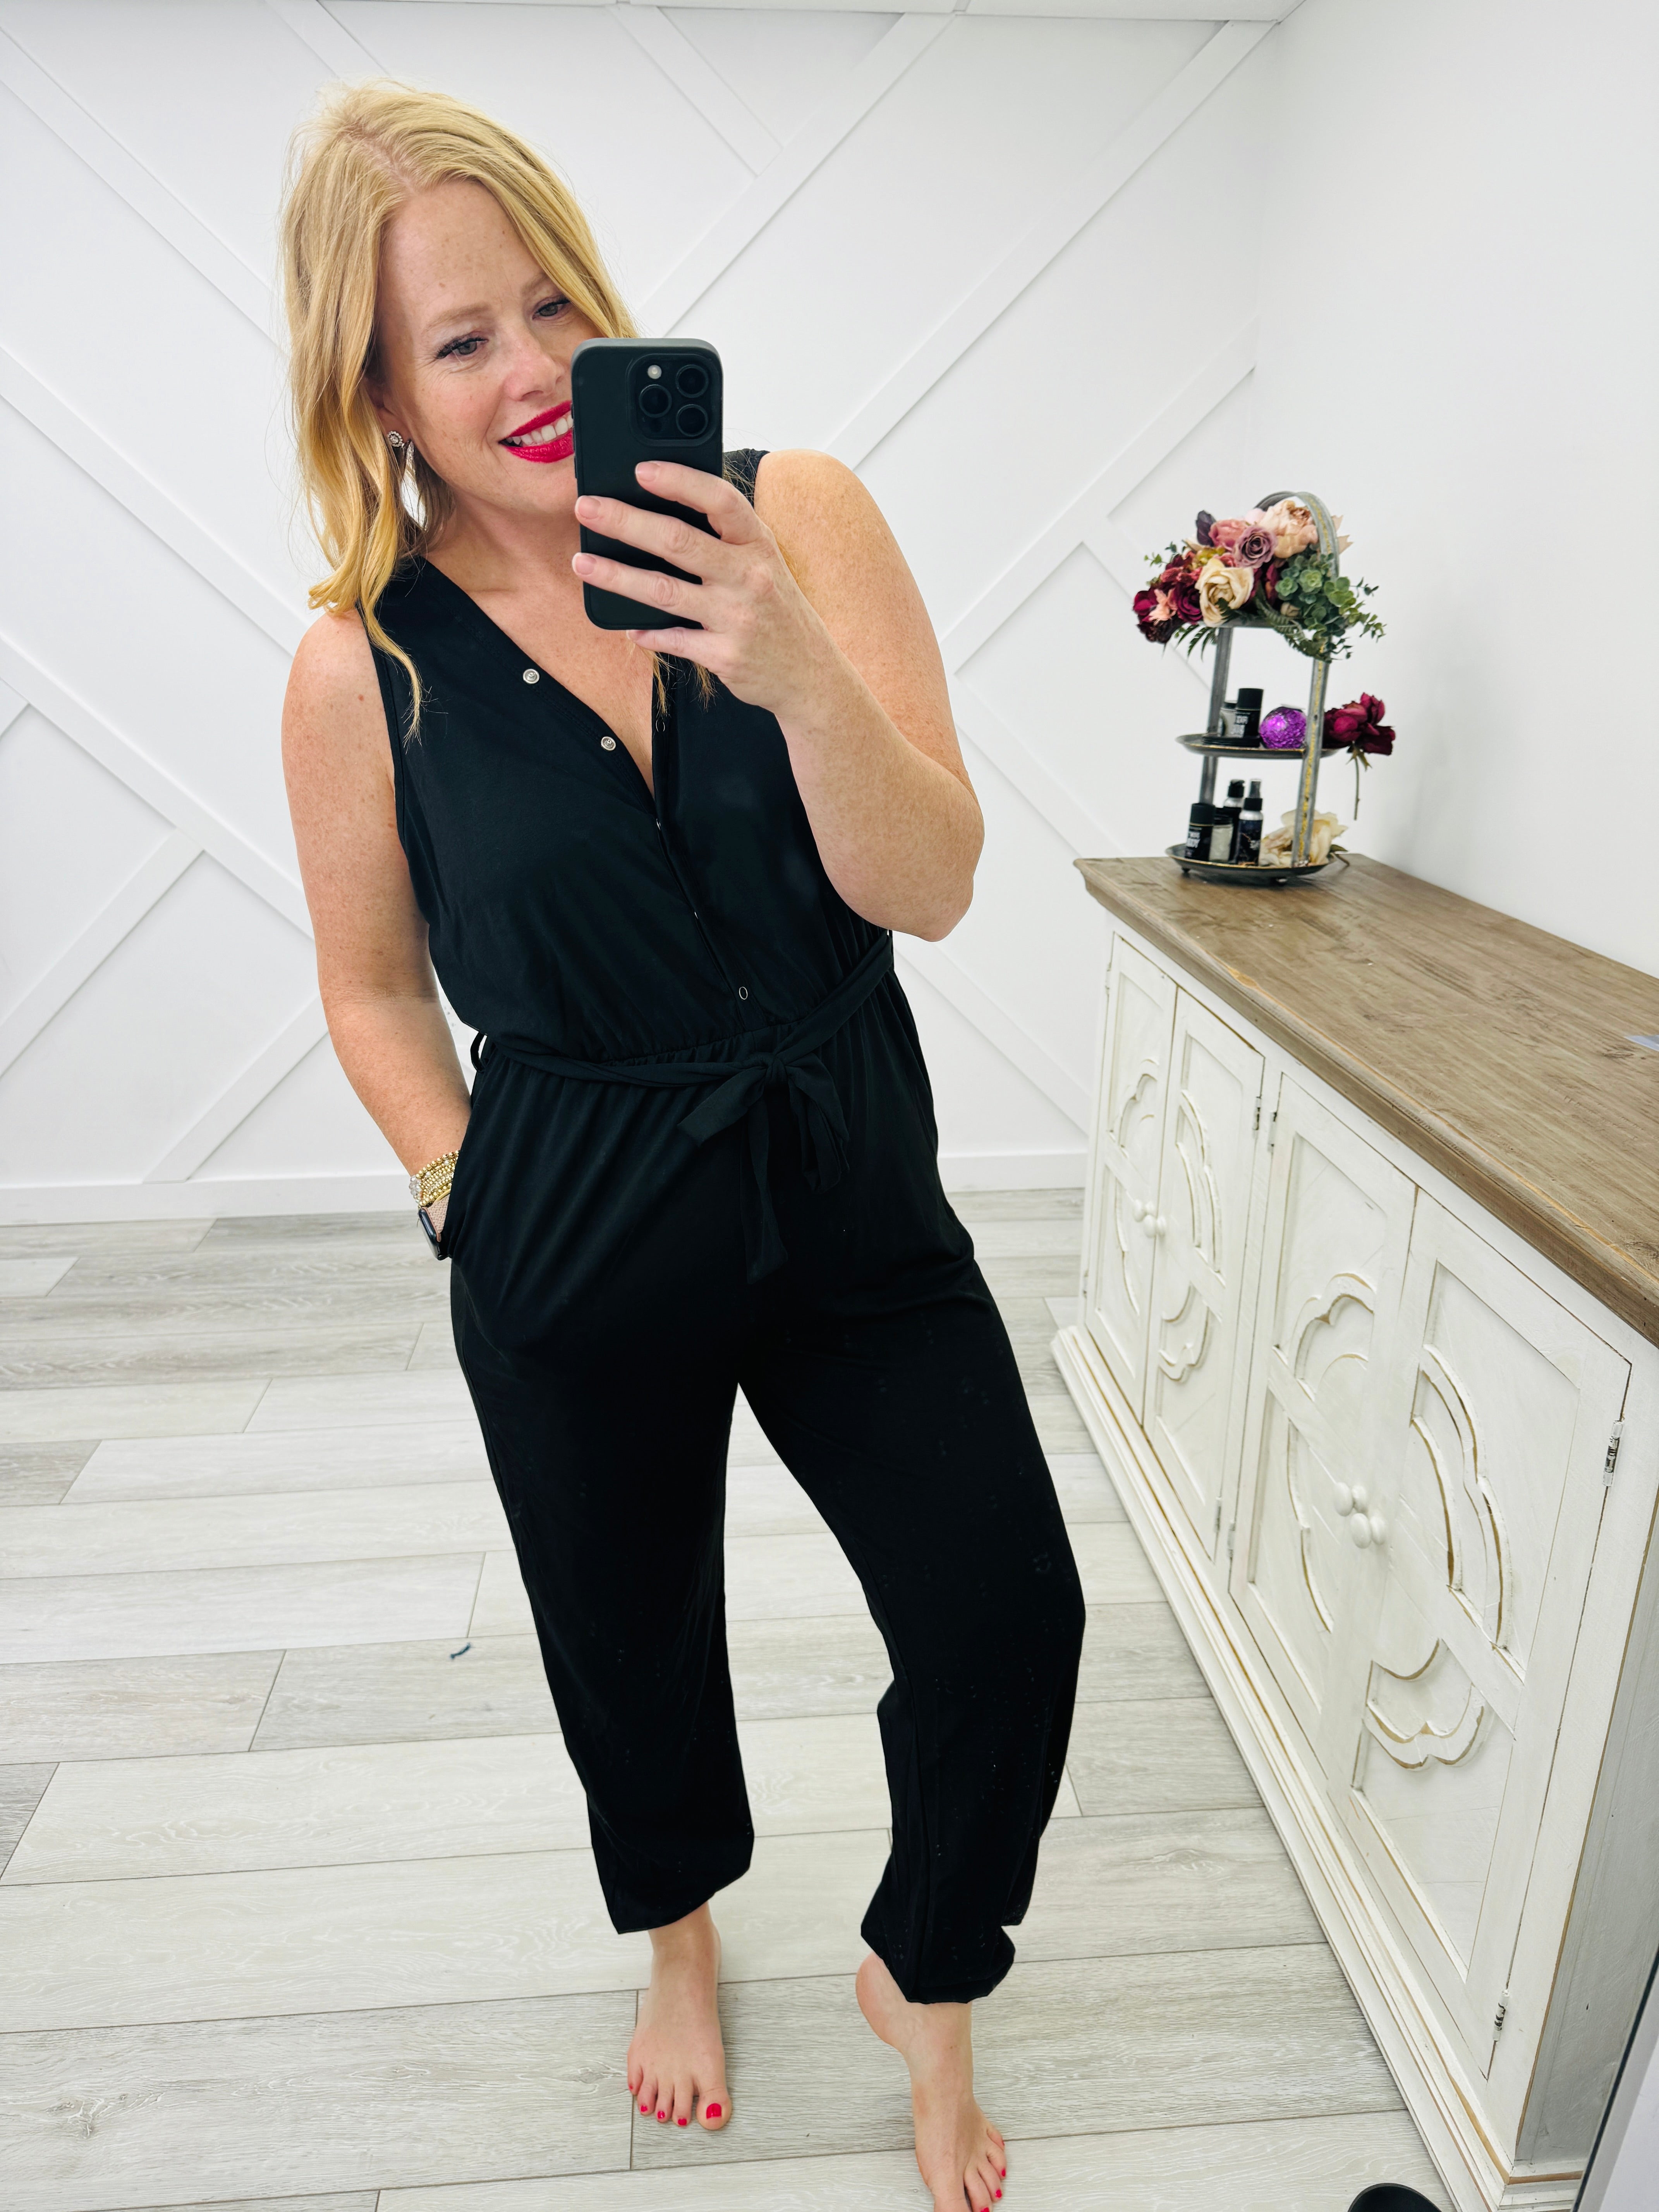 Down Bad Full Size Tie Waist Sleeveless Jumpsuit with Pockets